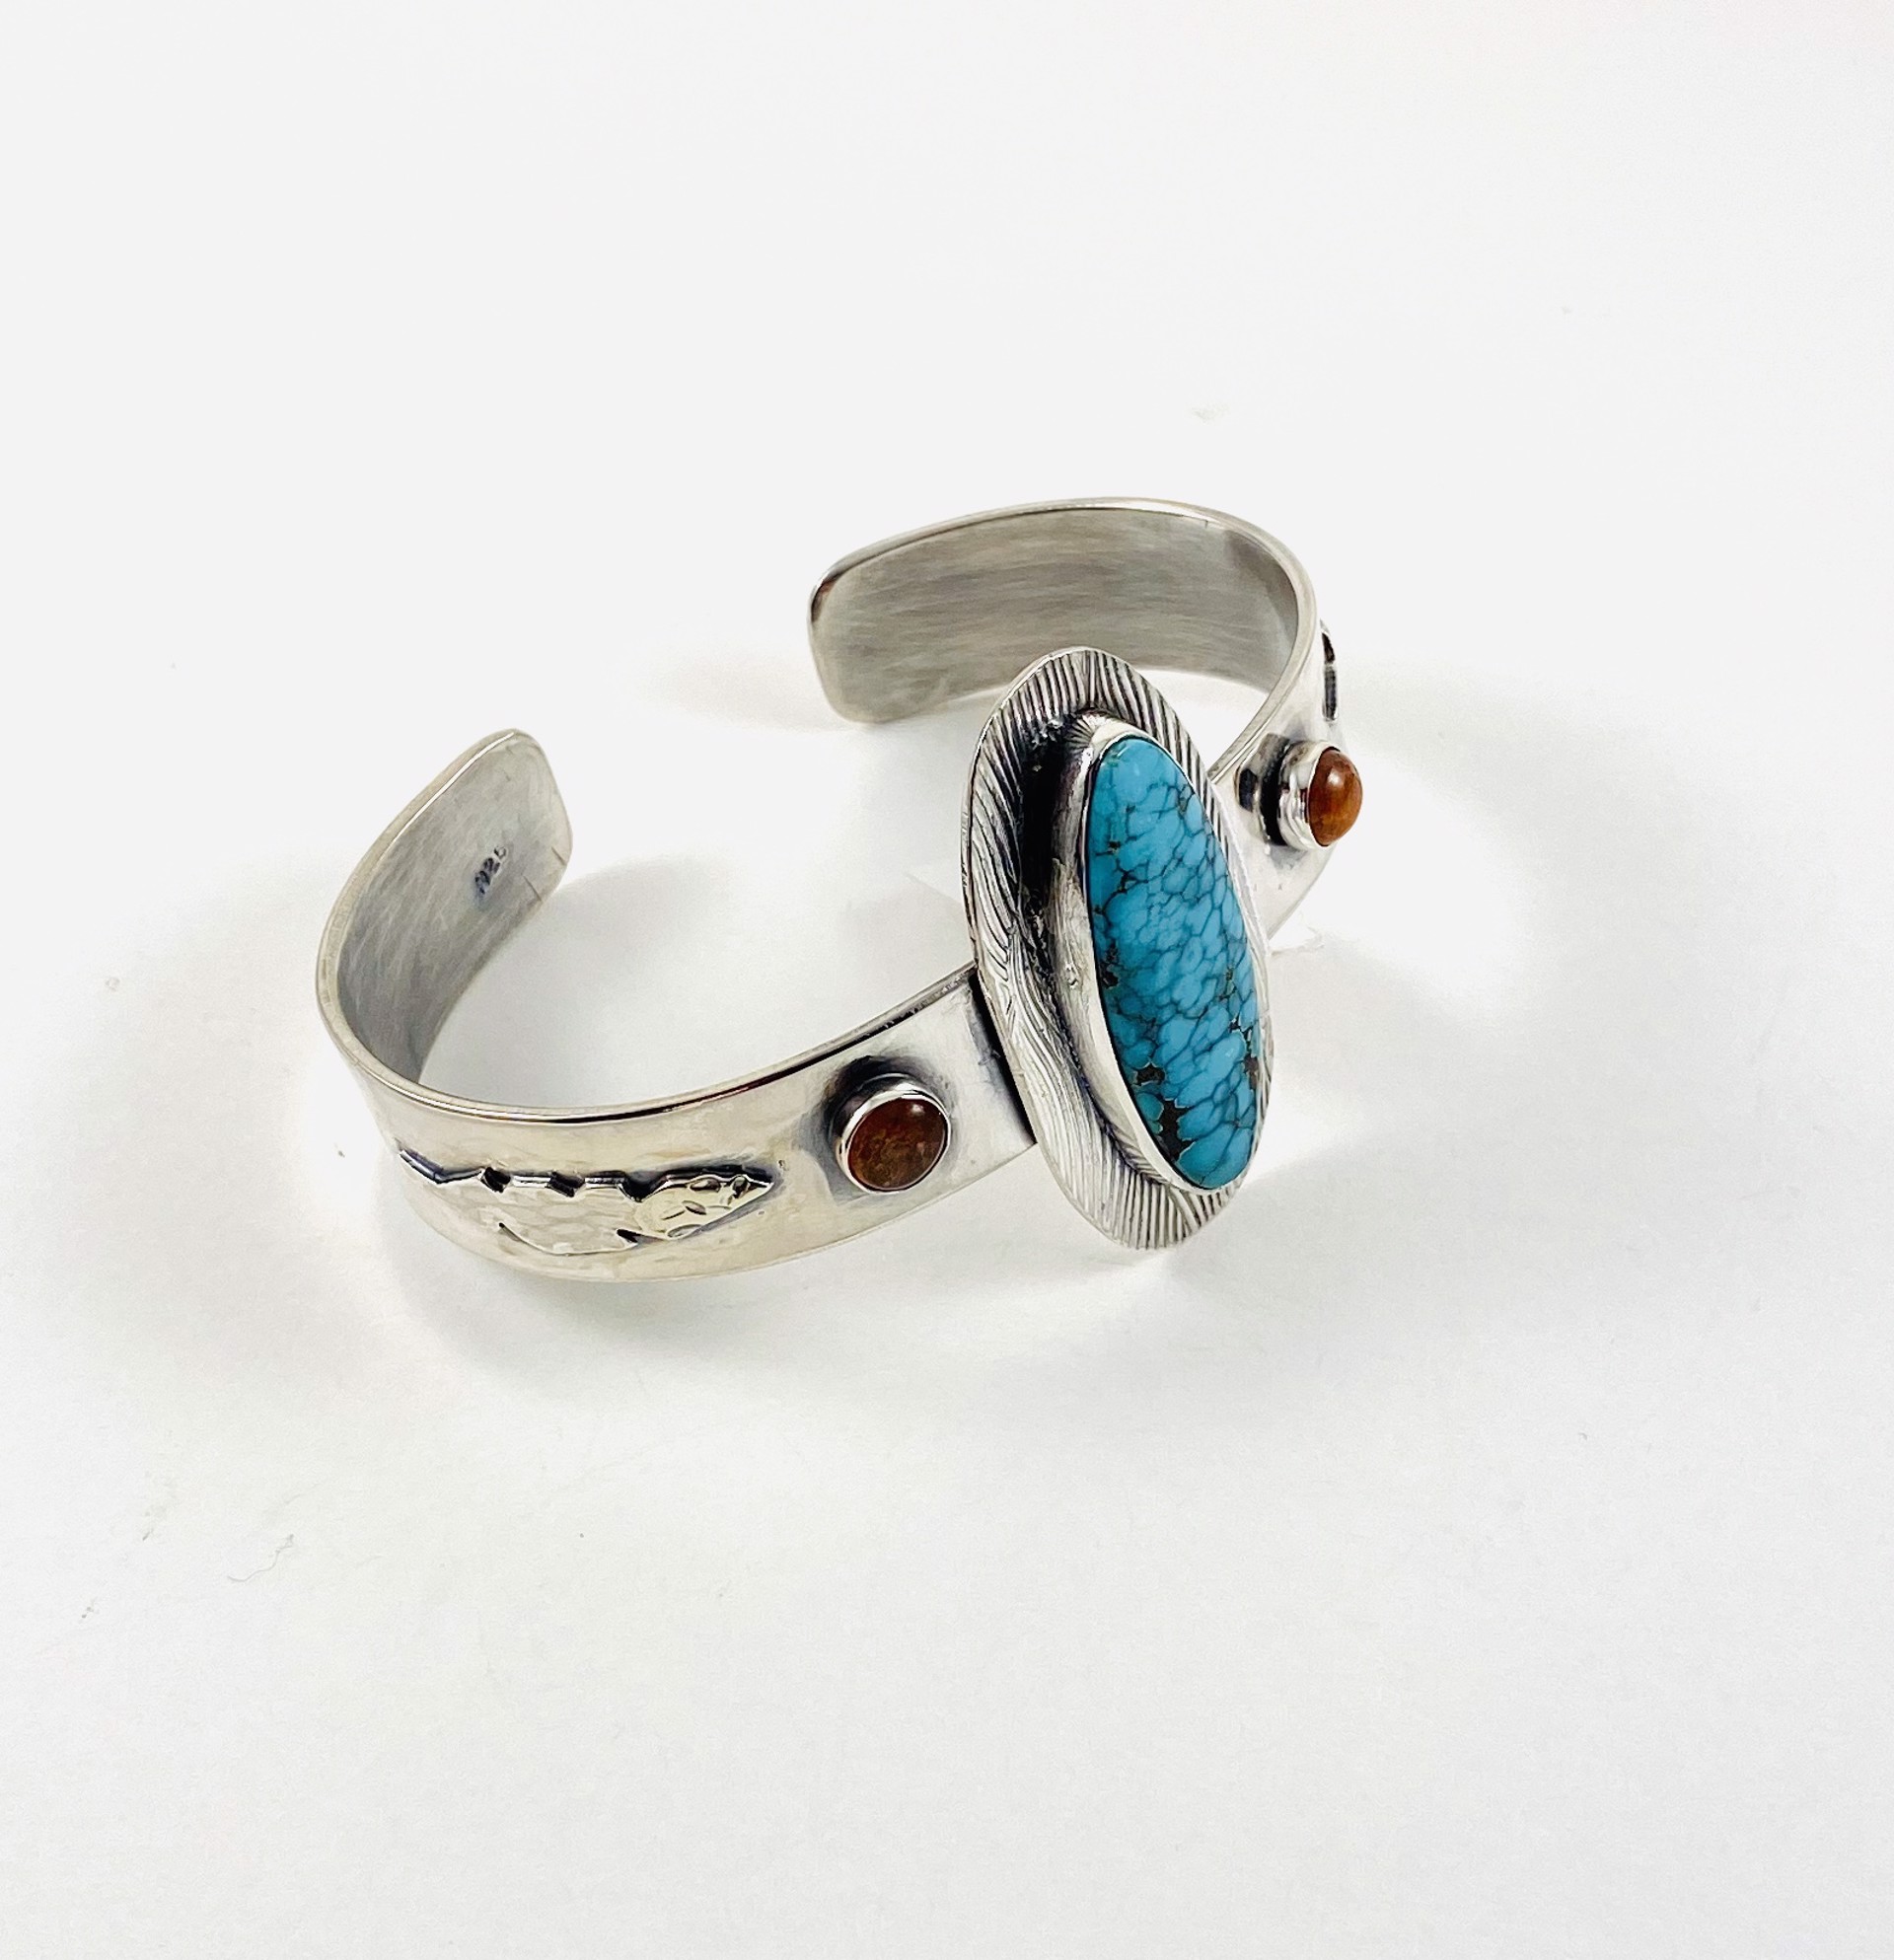 Turquoise and Sunstone Cuff Bracelet by Anne Bivens